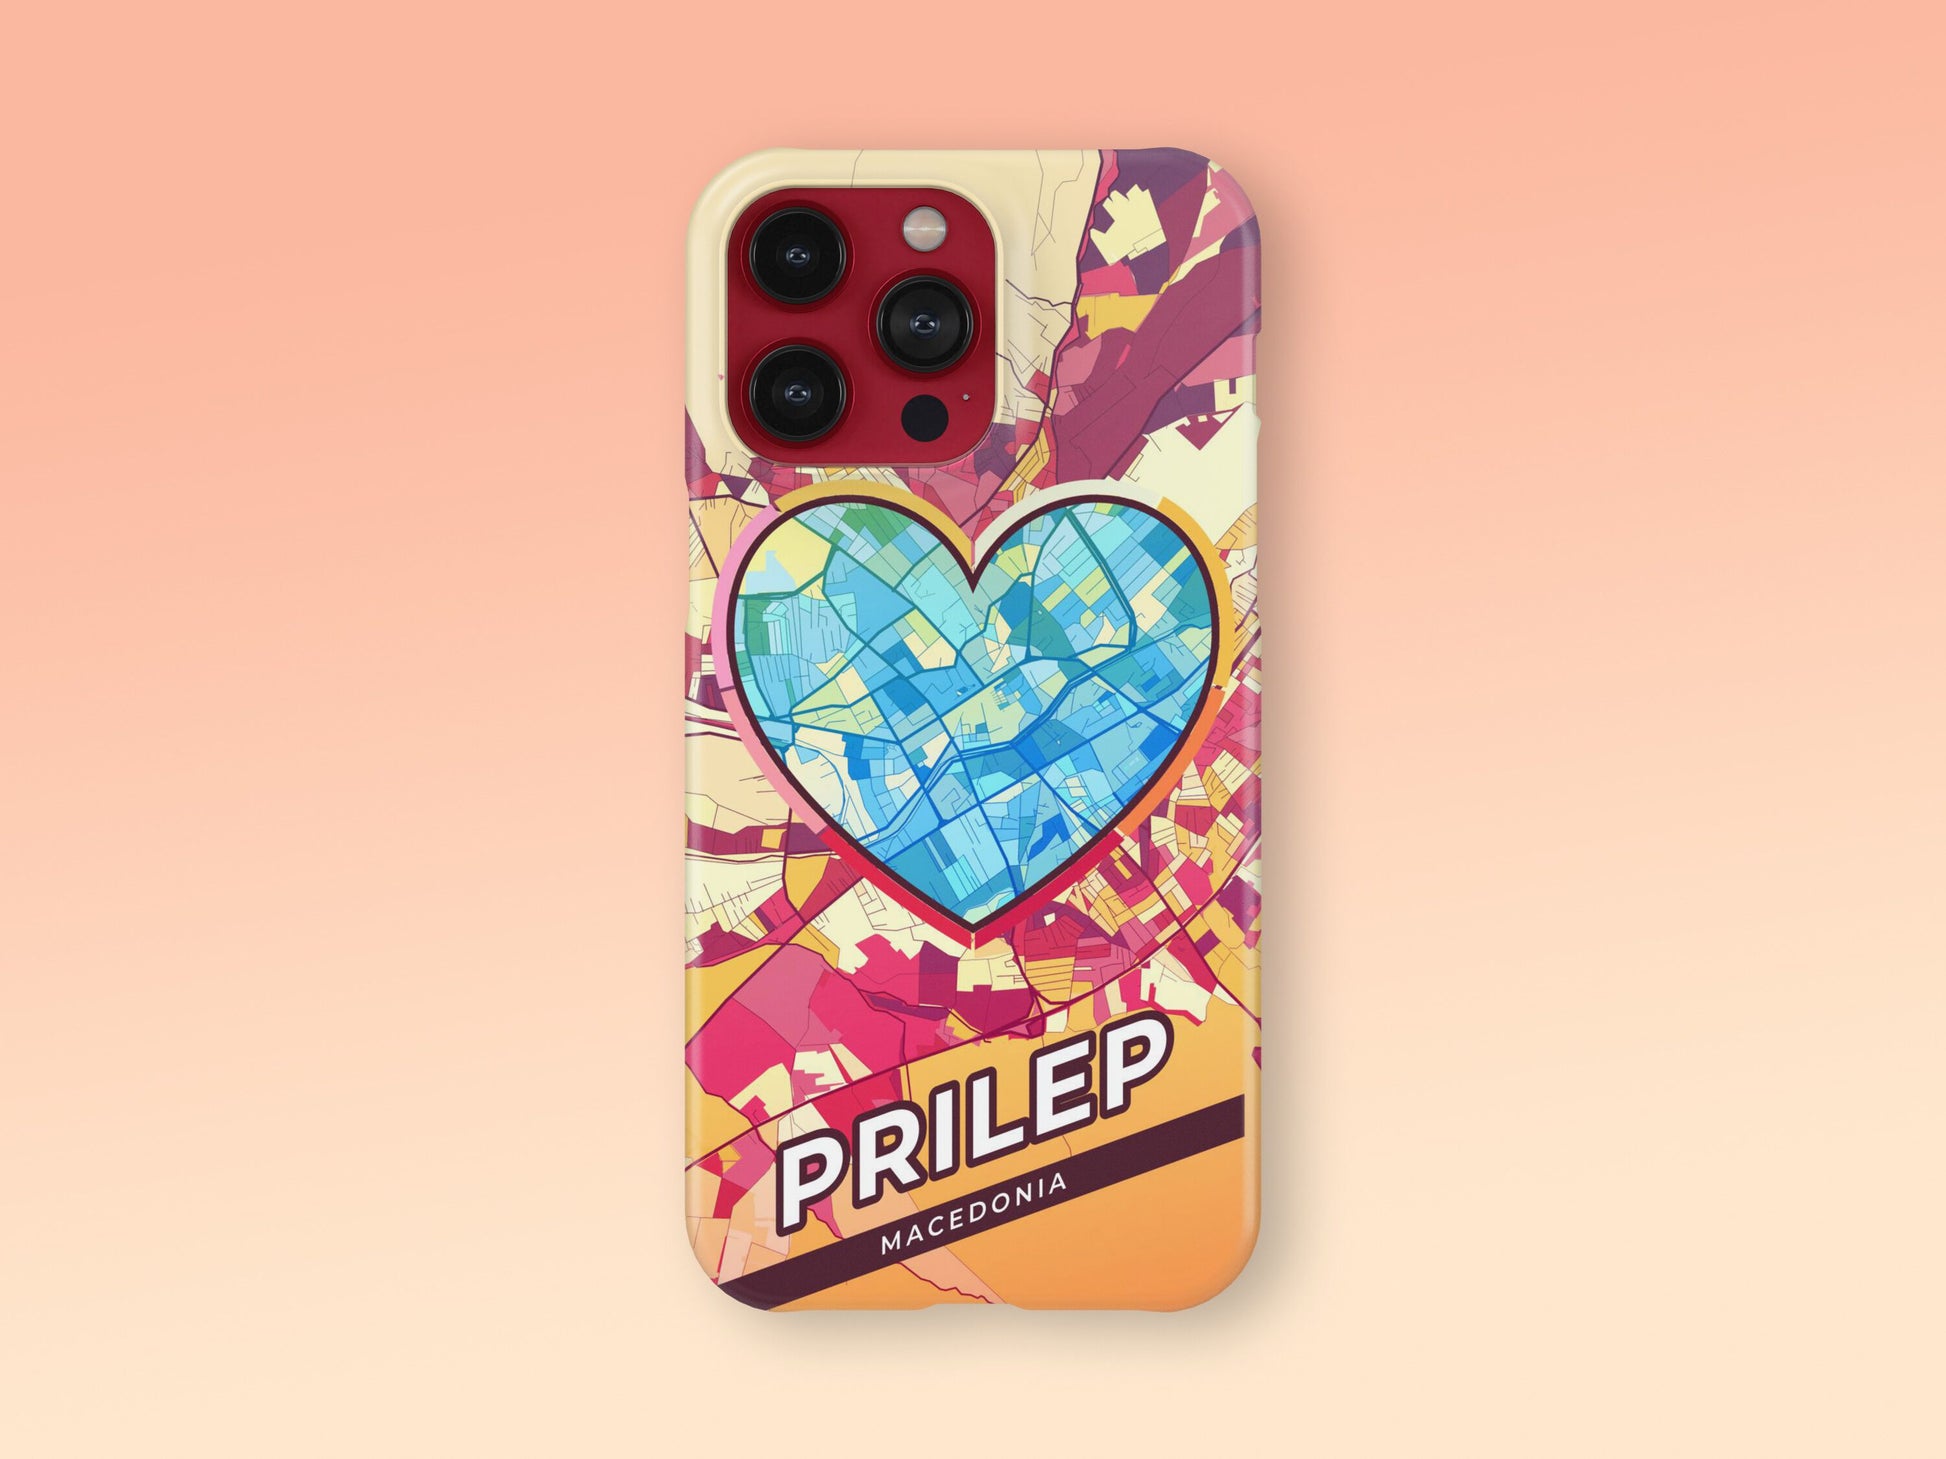 Prilep North Macedonia slim phone case with colorful icon. Birthday, wedding or housewarming gift. Couple match cases. 2